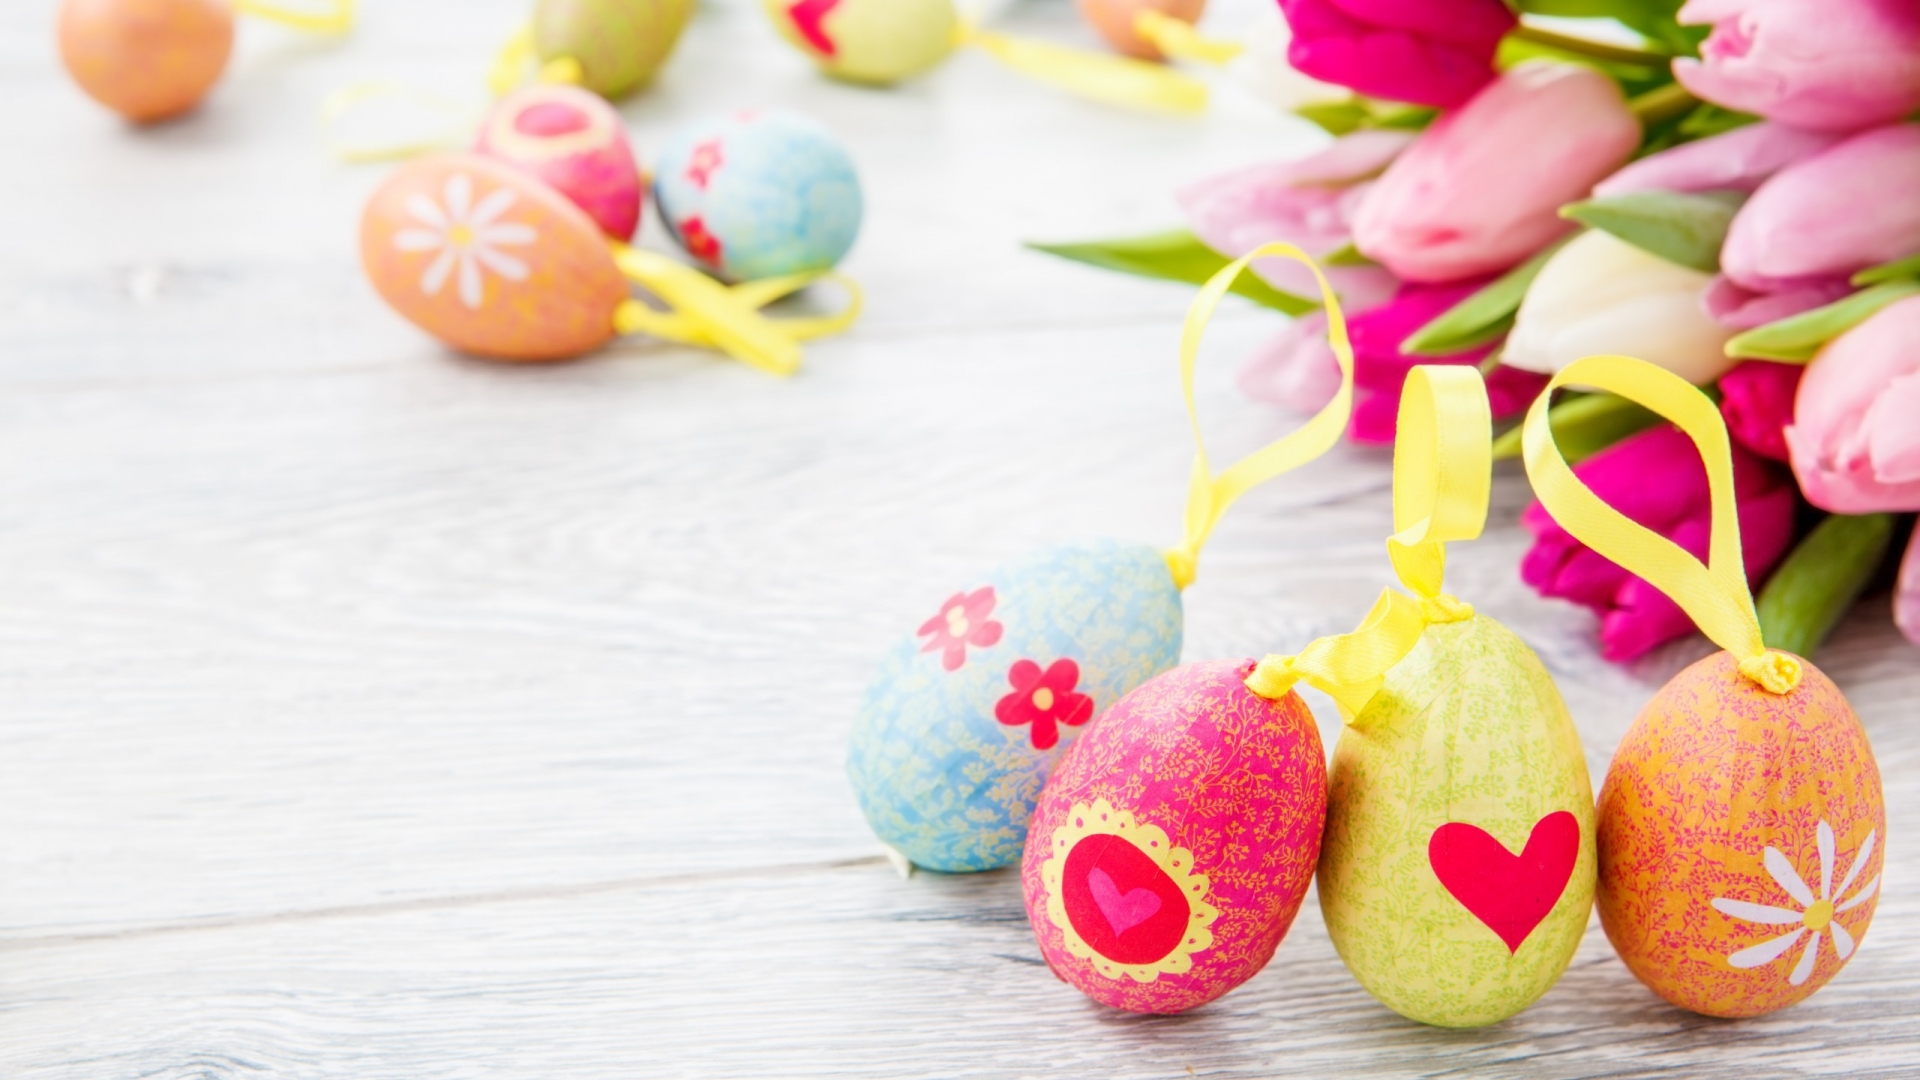 Decorative Easter Eggs for 1920 x 1080 HDTV 1080p resolution